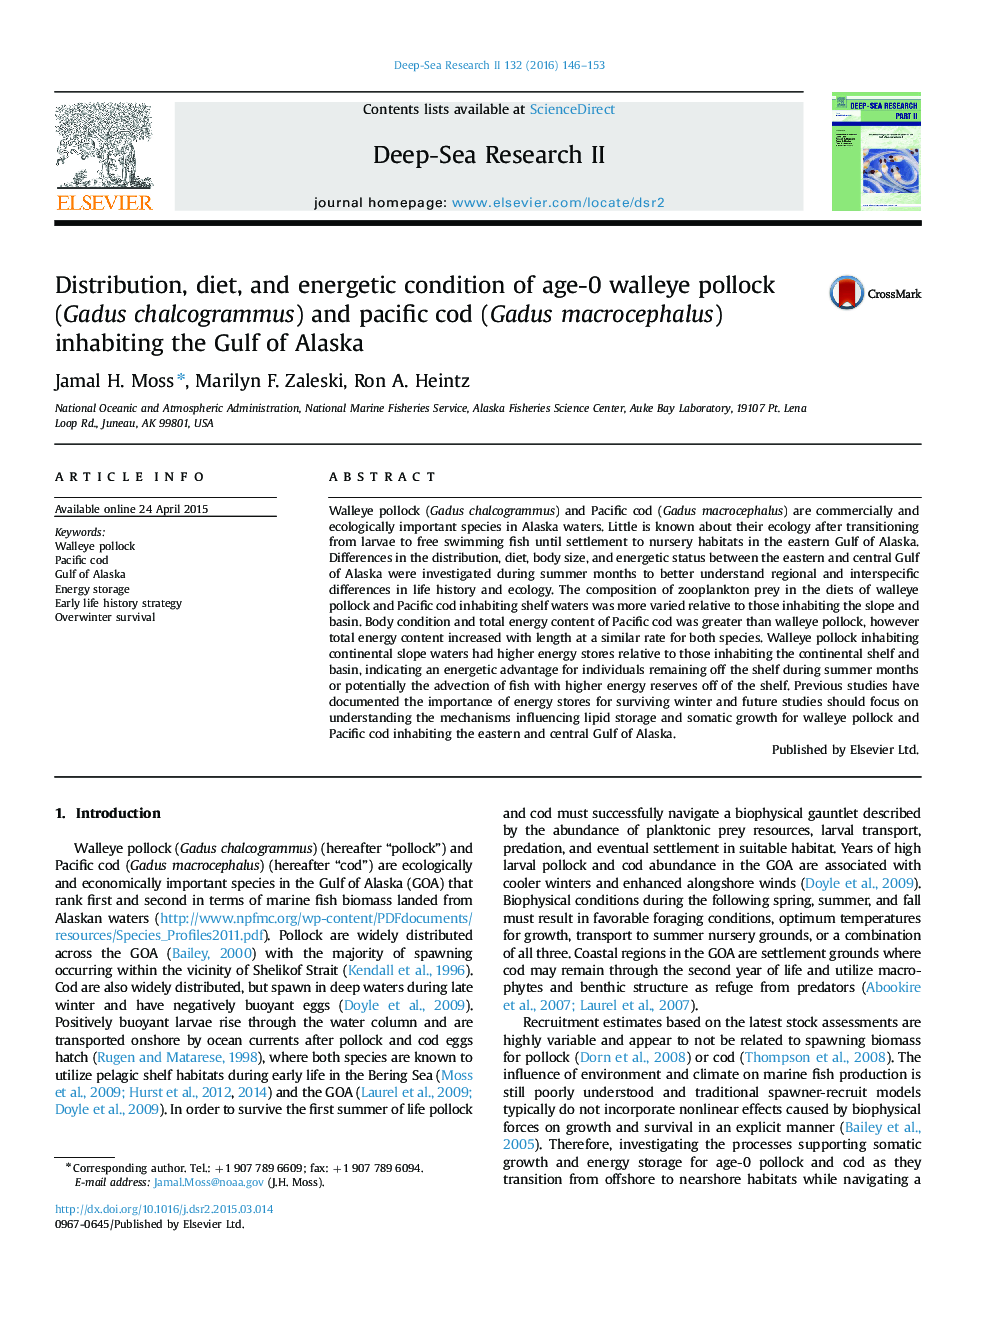 Distribution, diet, and energetic condition of age-0 walleye pollock (Gadus chalcogrammus) and pacific cod (Gadus macrocephalus) inhabiting the Gulf of Alaska